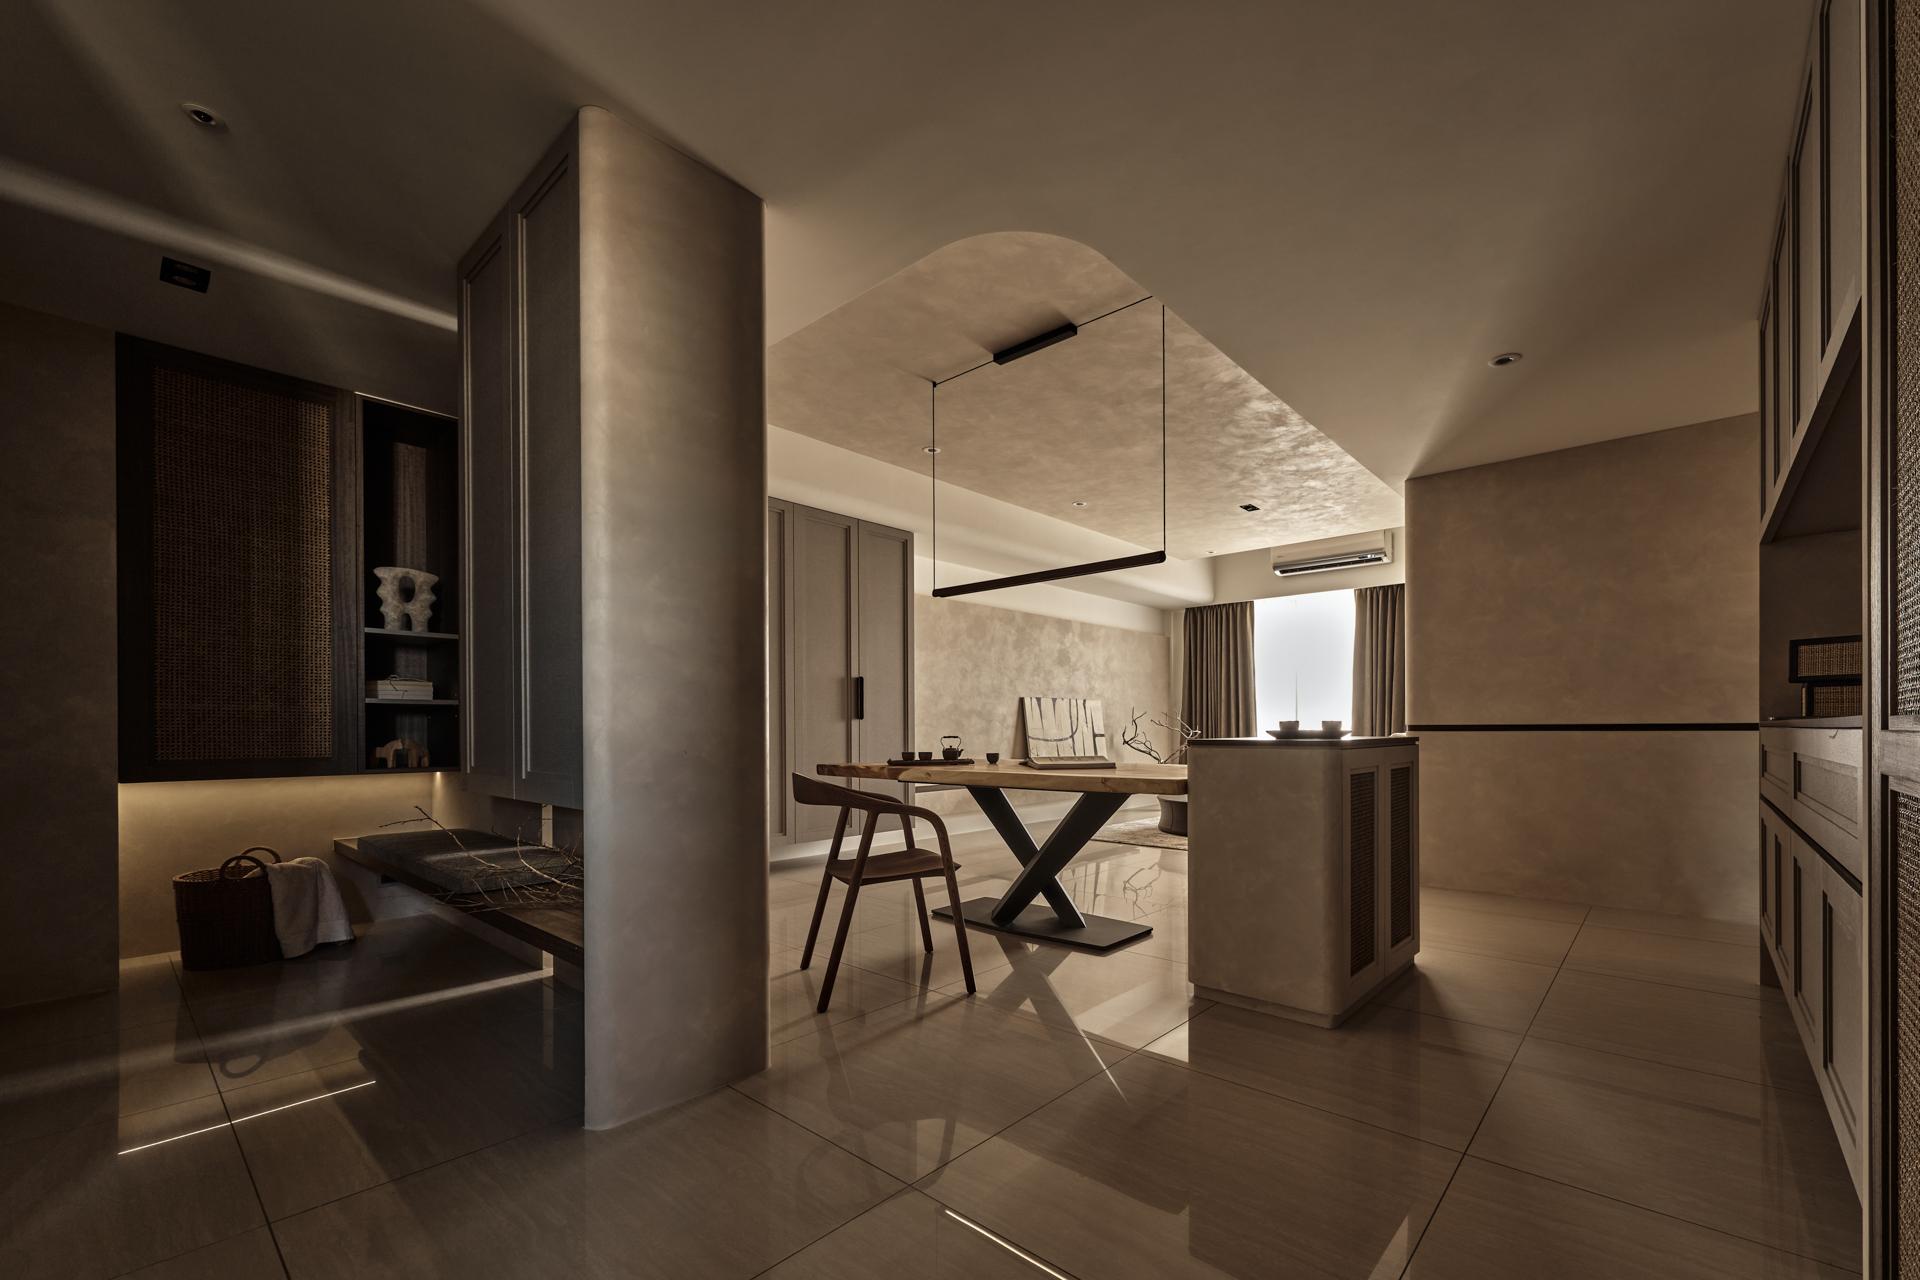 This Taiwan 1,200 Sq. Ft. Abode Evokes Emotions Through Light and Shadow